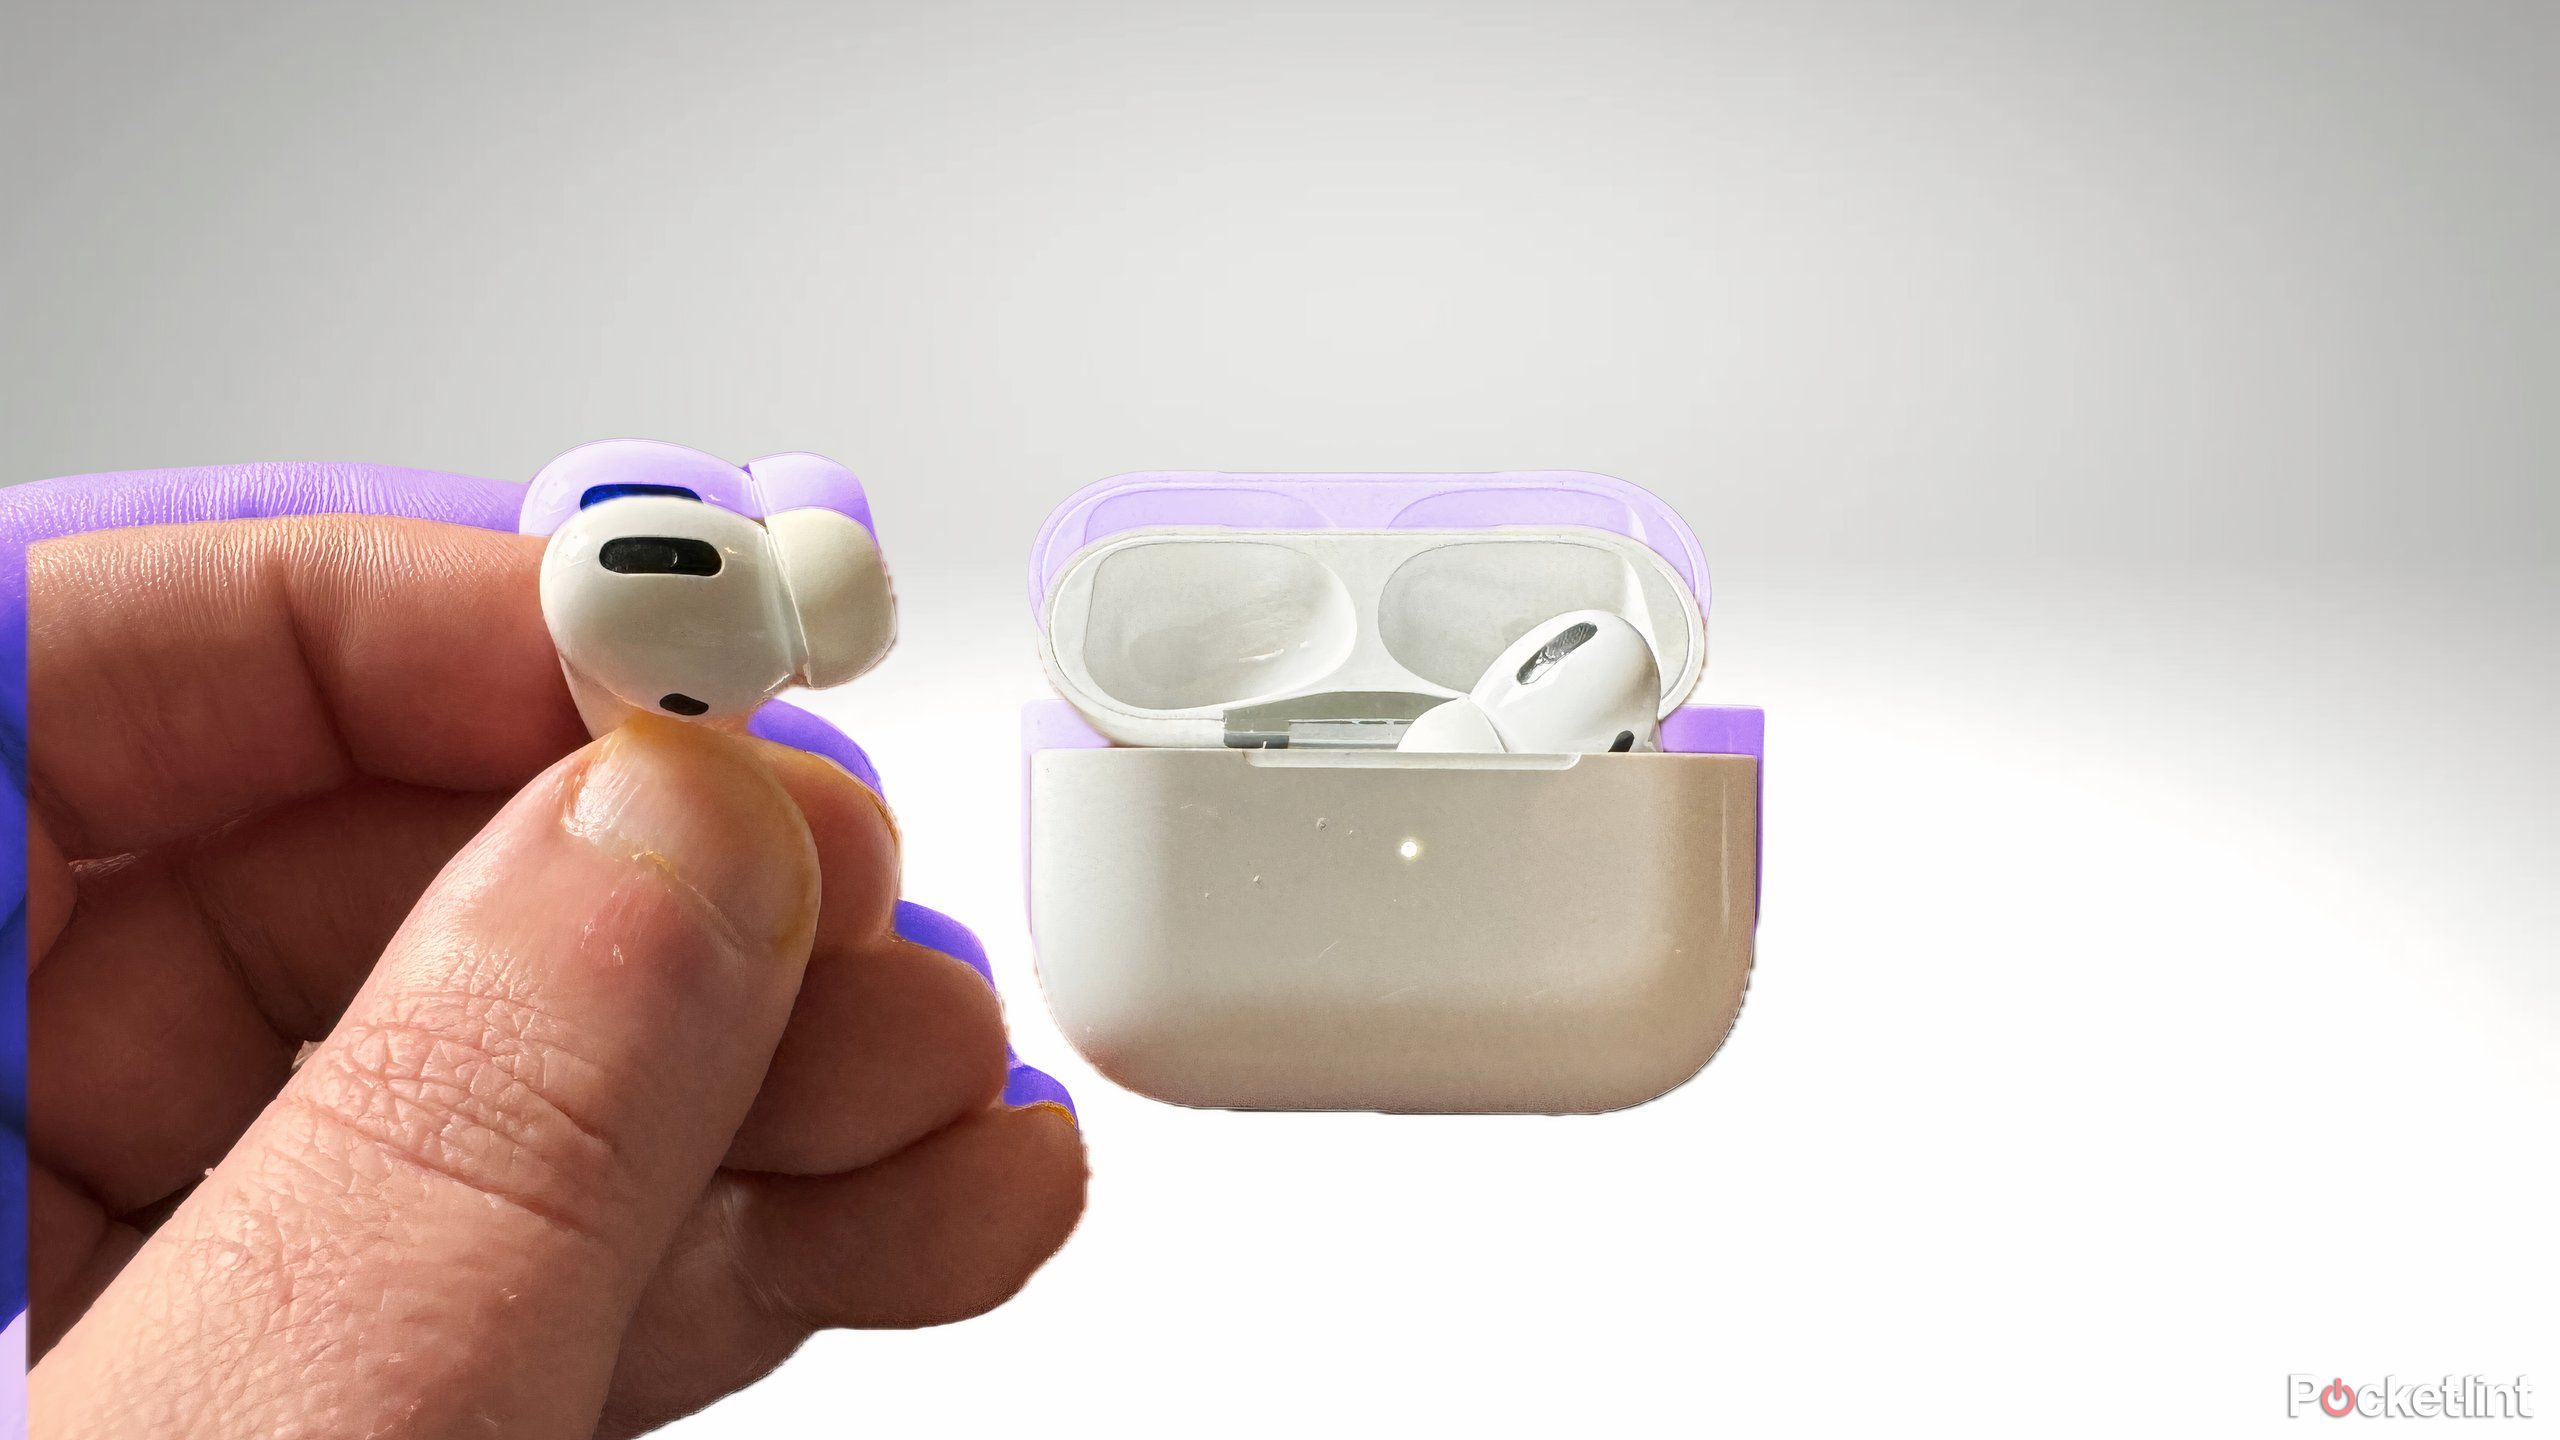 apple airpods being held and demonstrating the pinch gesture